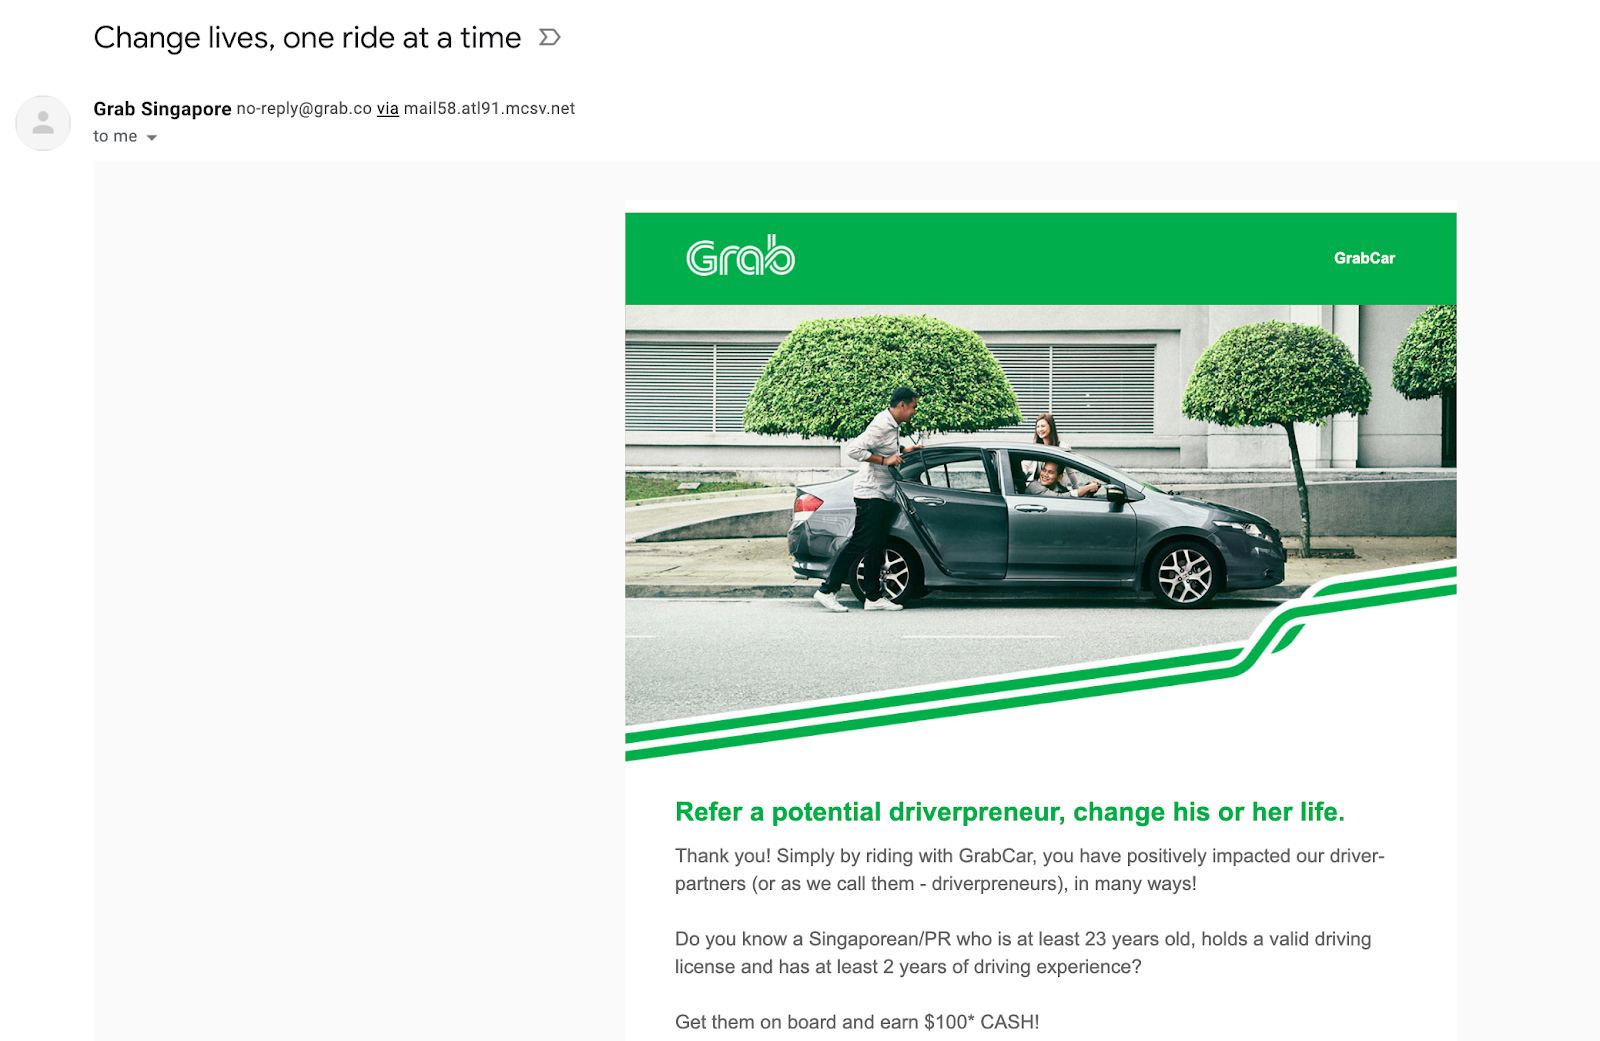 Email marketing campaign example by Grab